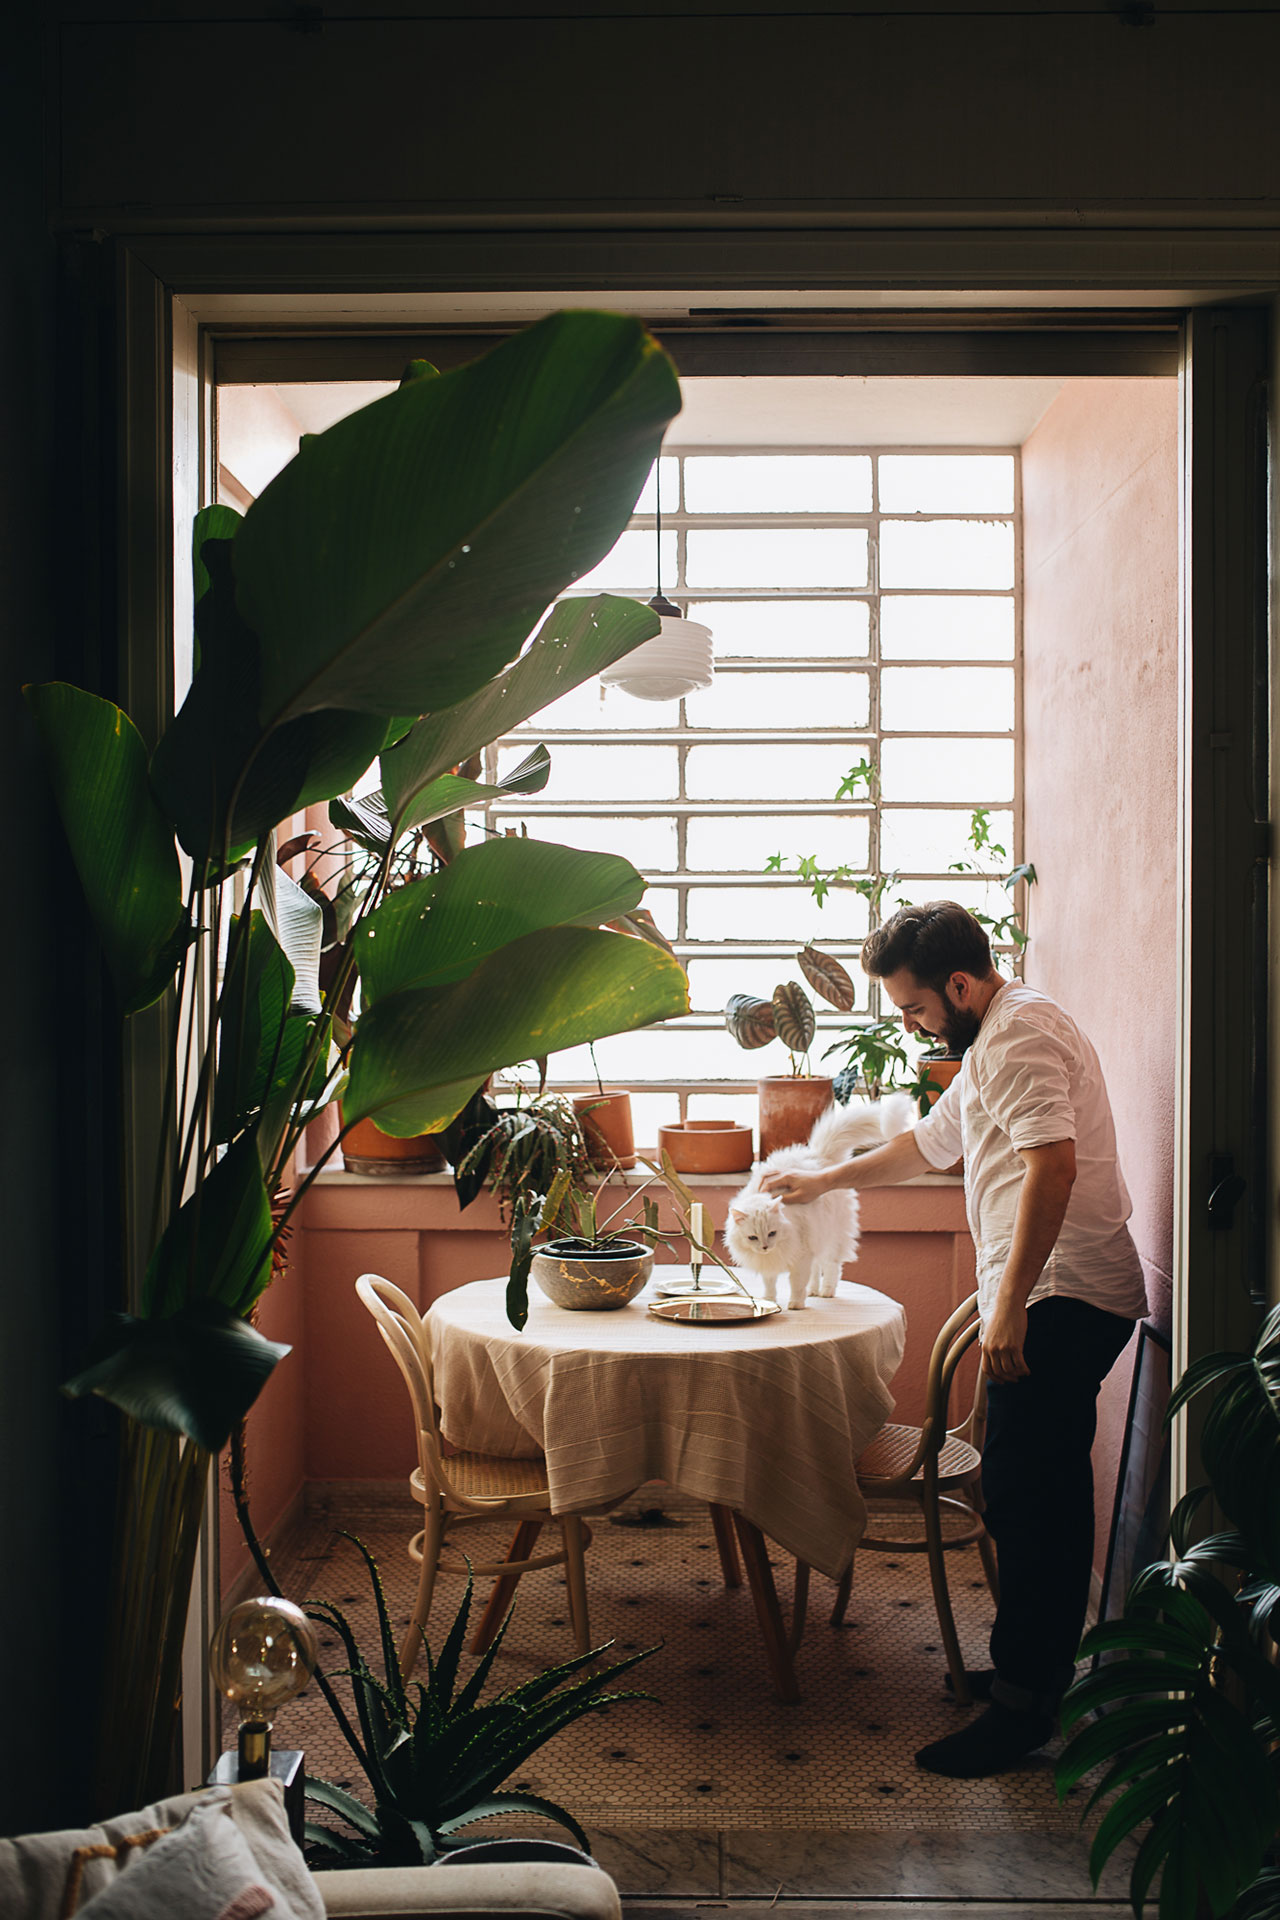 PLANT TRIBE LIVING HAPPILY EVER AFTER WITH PLANTSBy Igor Josifovic &amp; Judith de Graaff
Photo: The home of Derek Fernandes in São Paulo, Brazil.Photography by Jules Villbrandt.